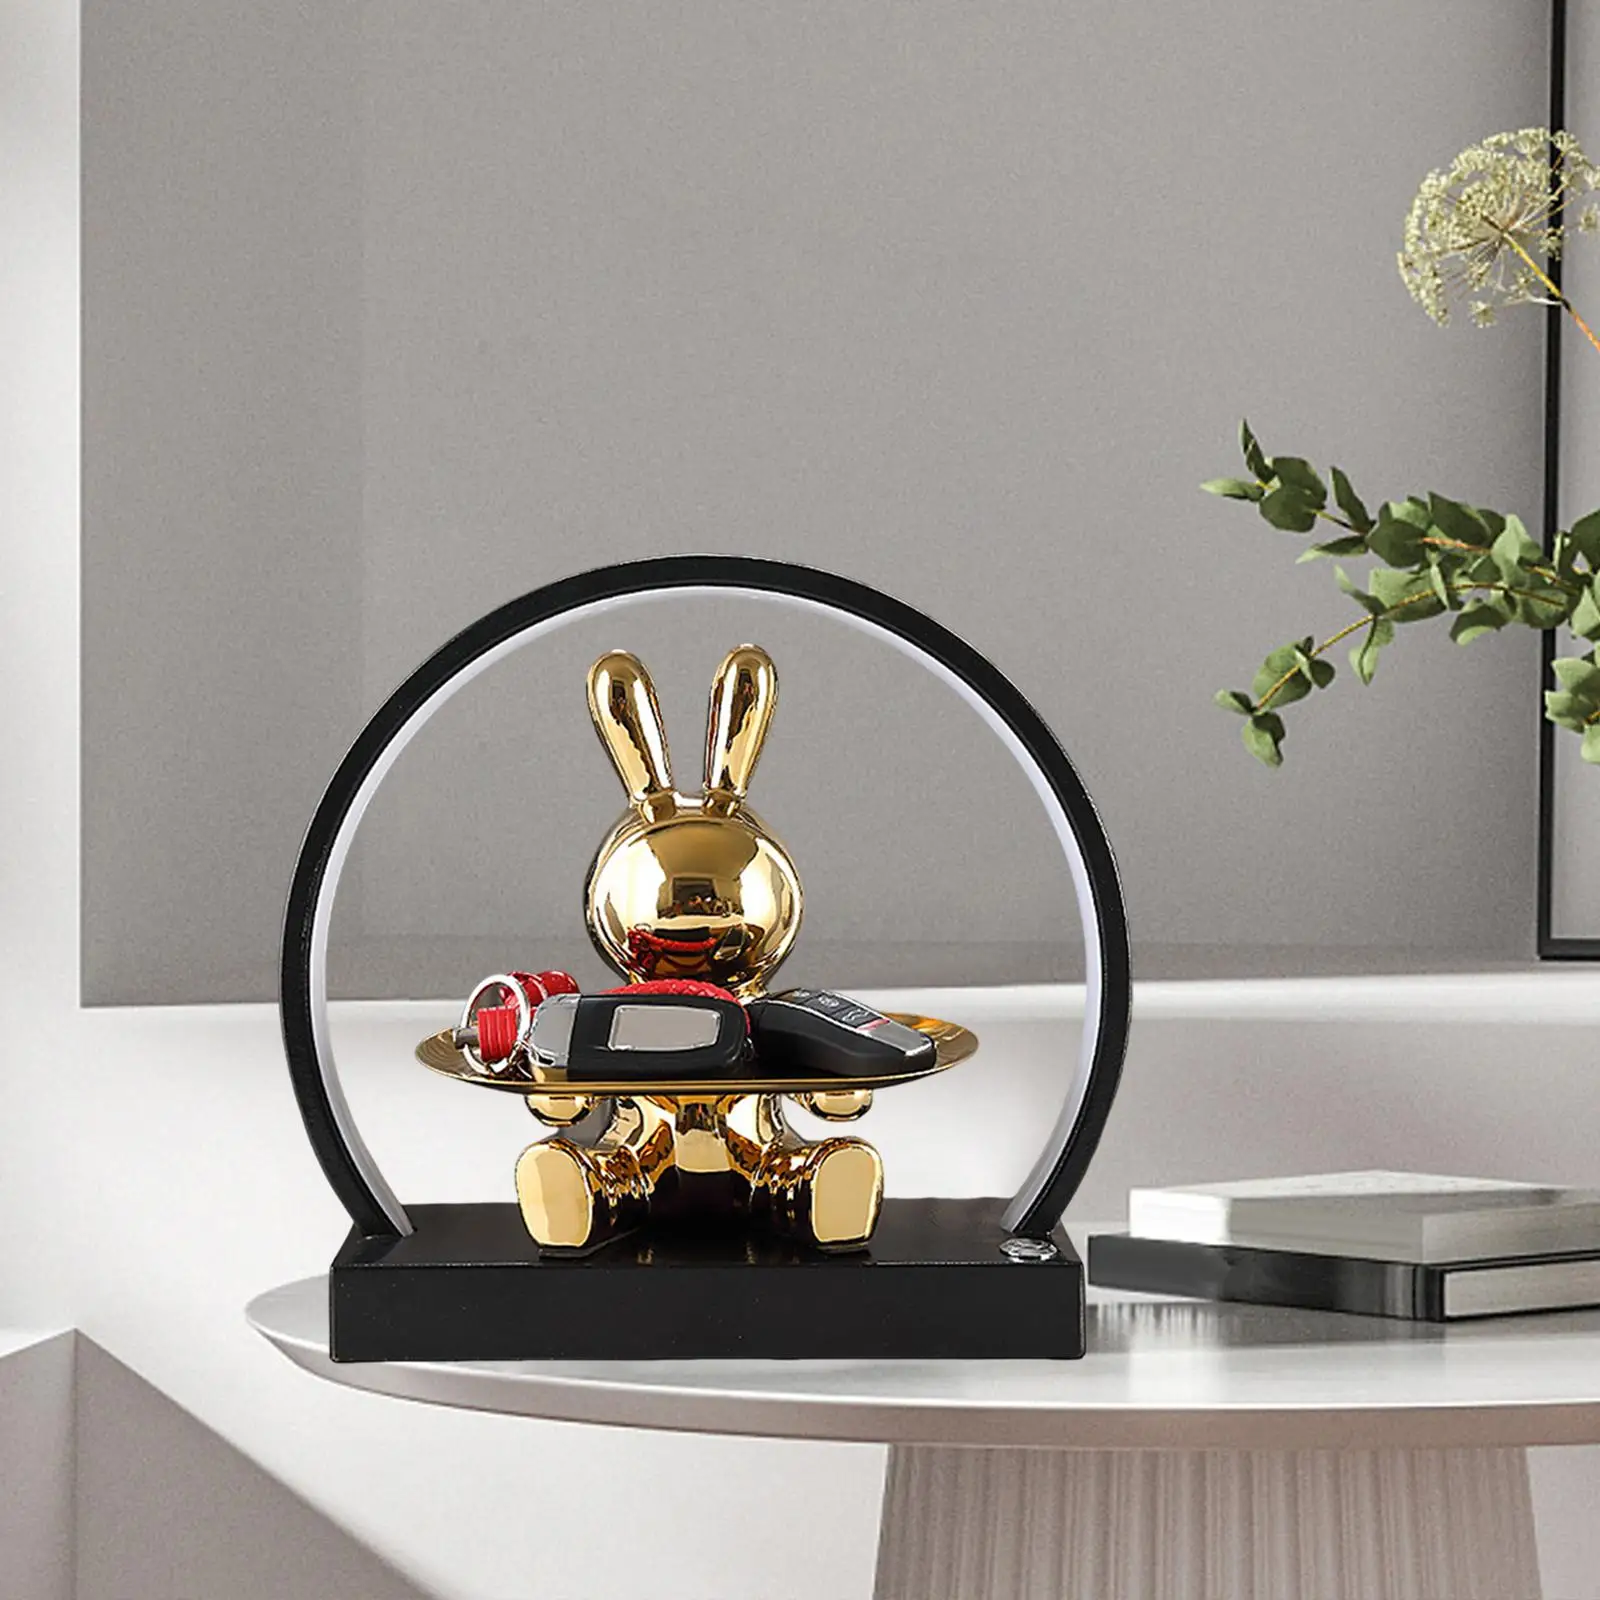 Rabbit Figurine Ceramic Sculpture Jewelry Earrings Tray Bunny Figurine Statue Table Organizer Home Decorations for Restaurant